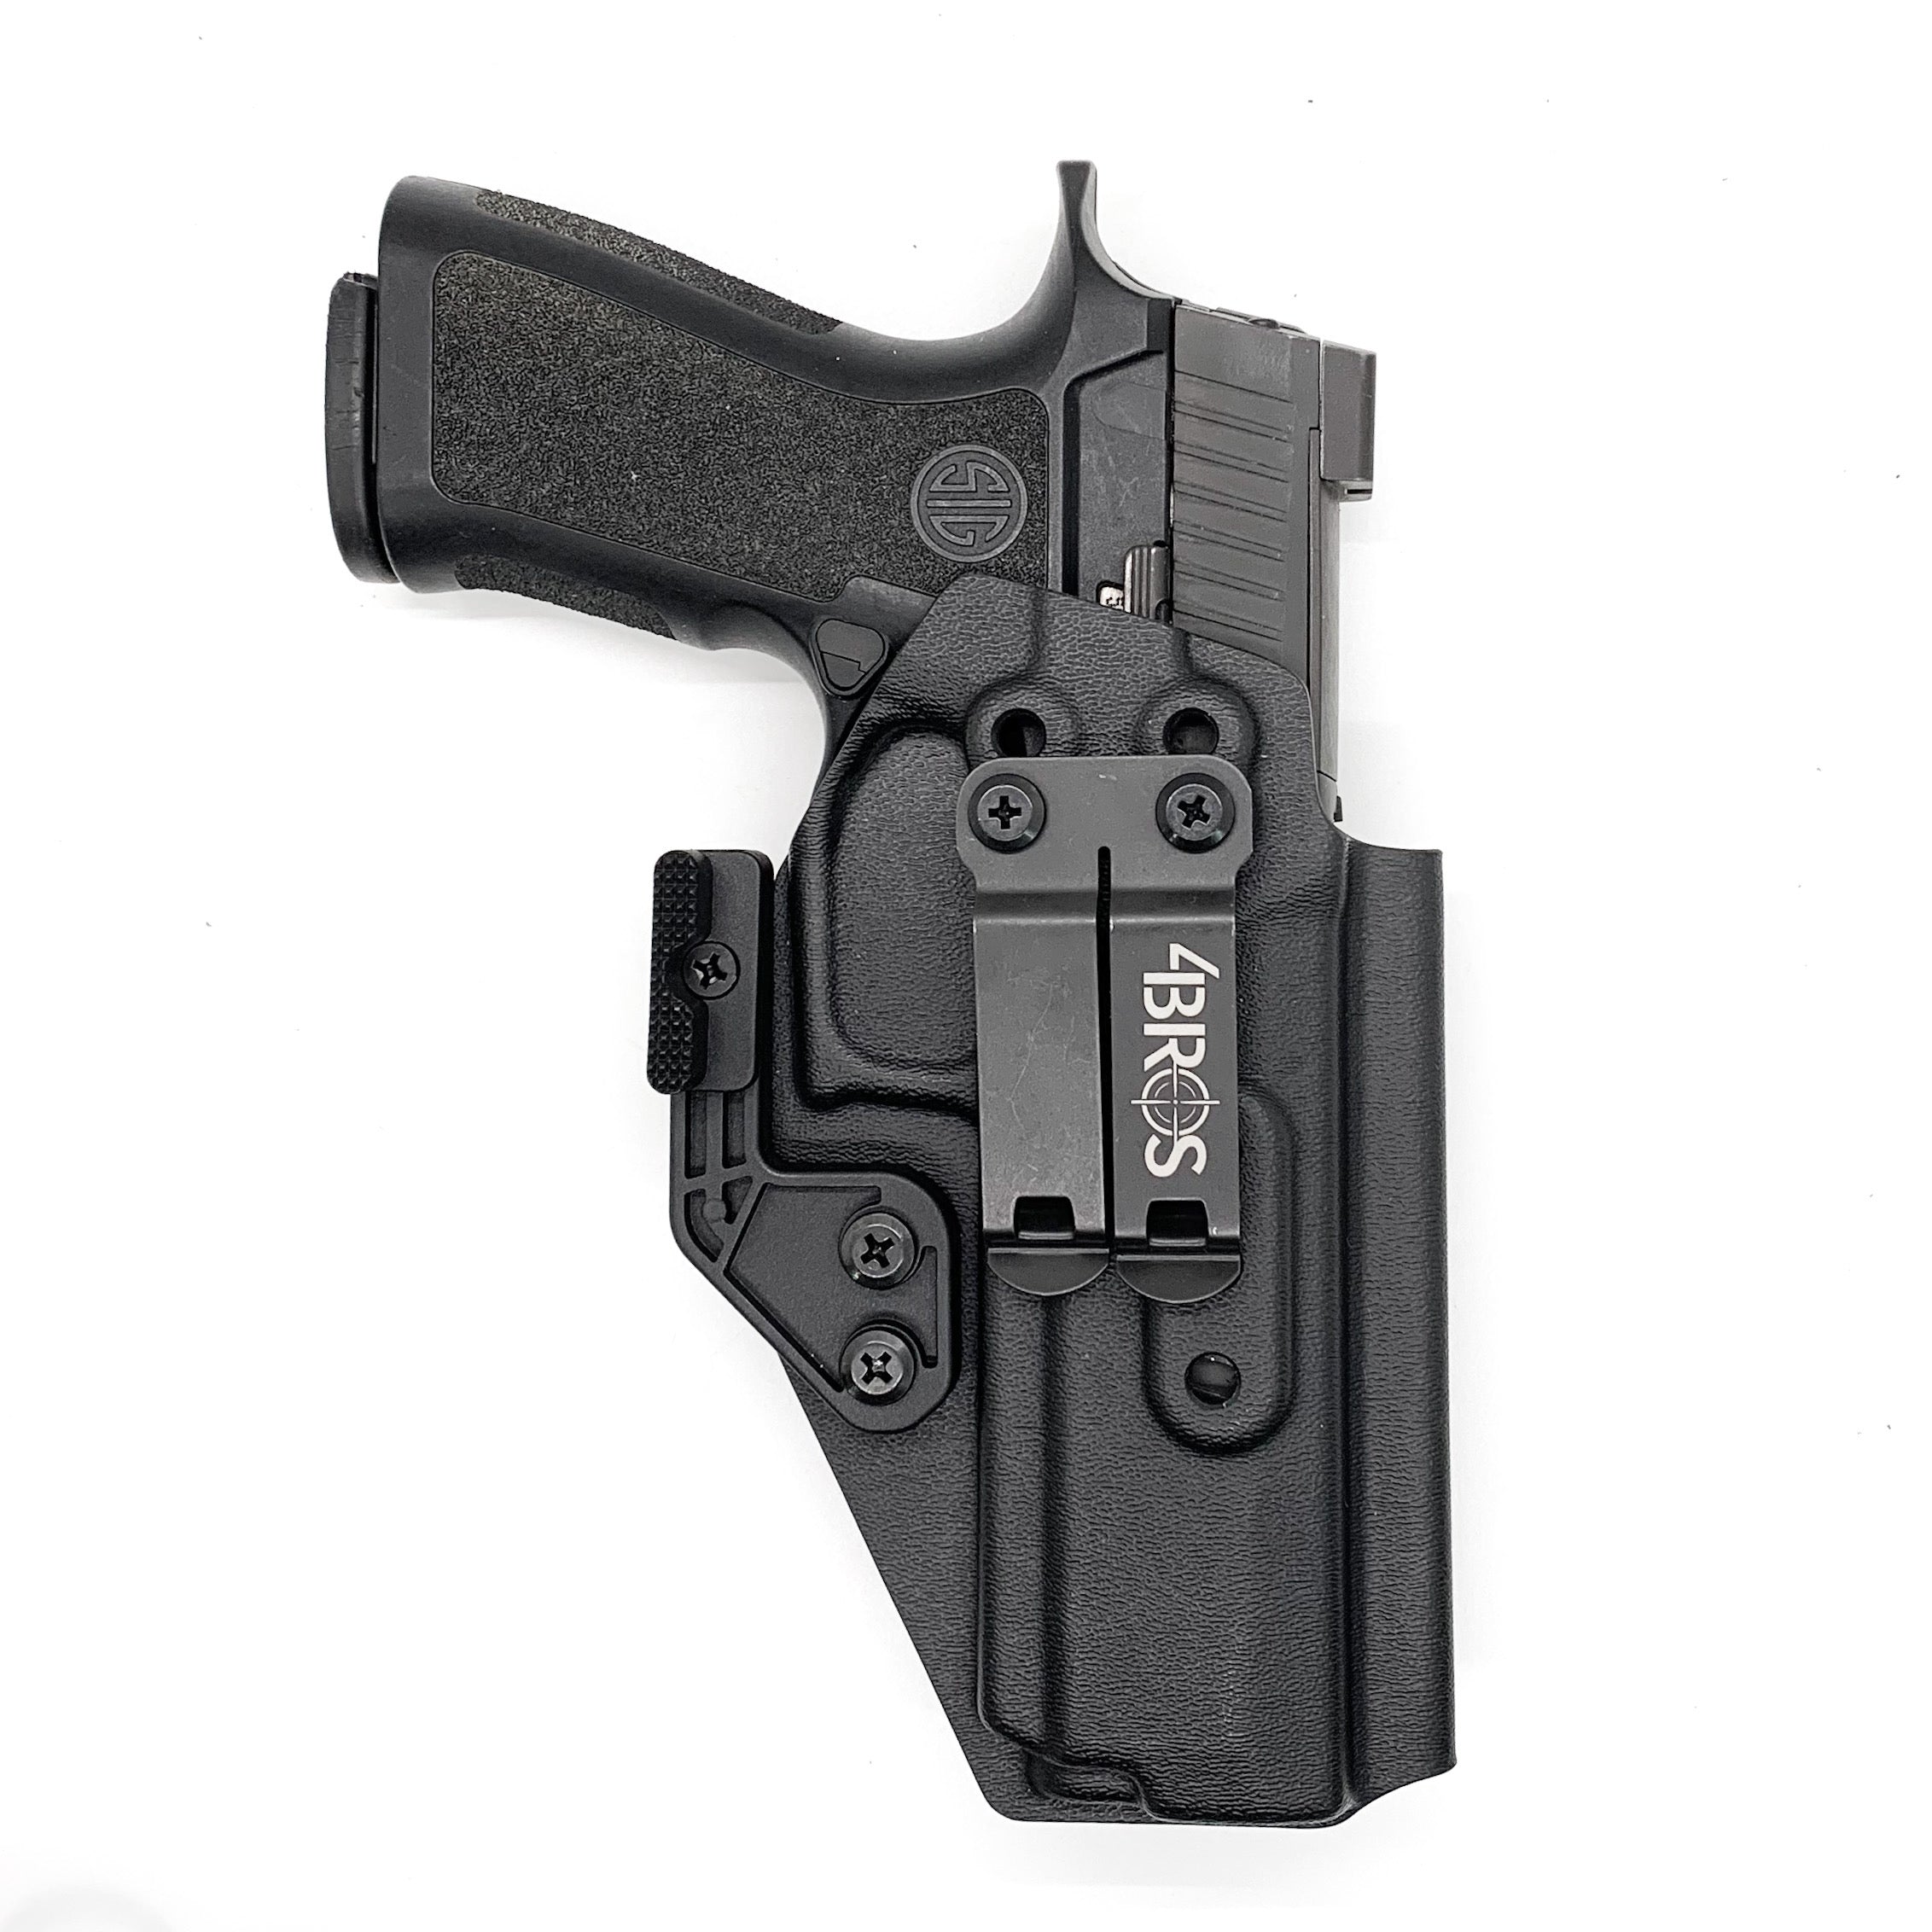 For the best inside Waistband Kydex holster designed to fit the Sig Sauer P320 X-Five Legion pistols shop Four Brothers Holsters.  Full sweatguard, adjustable retention, adjustable ride height, and cant.  Minimal material and smooth edges reduce printing and fit most red dot sights. Proudly made in the USA.  XFive X5